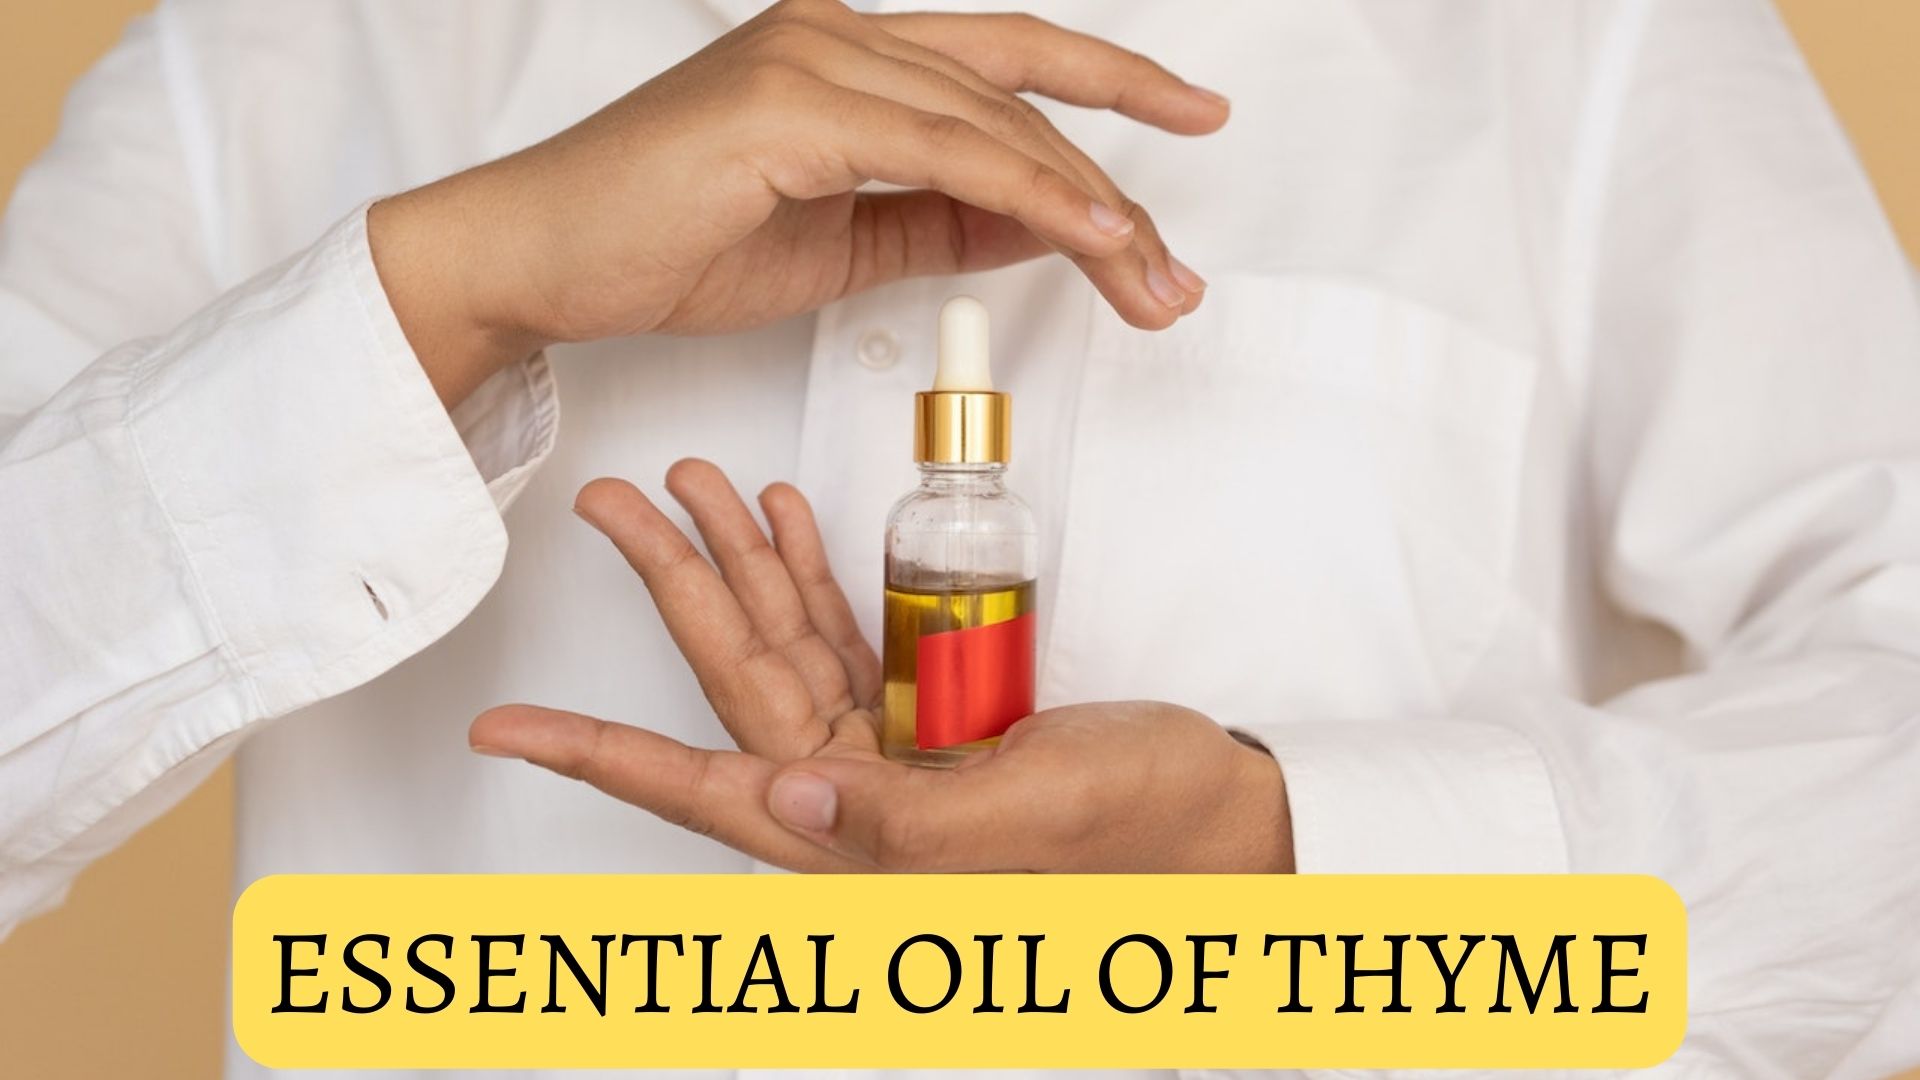 Essential Oil Of Thyme - Provides Natural Pain Relief